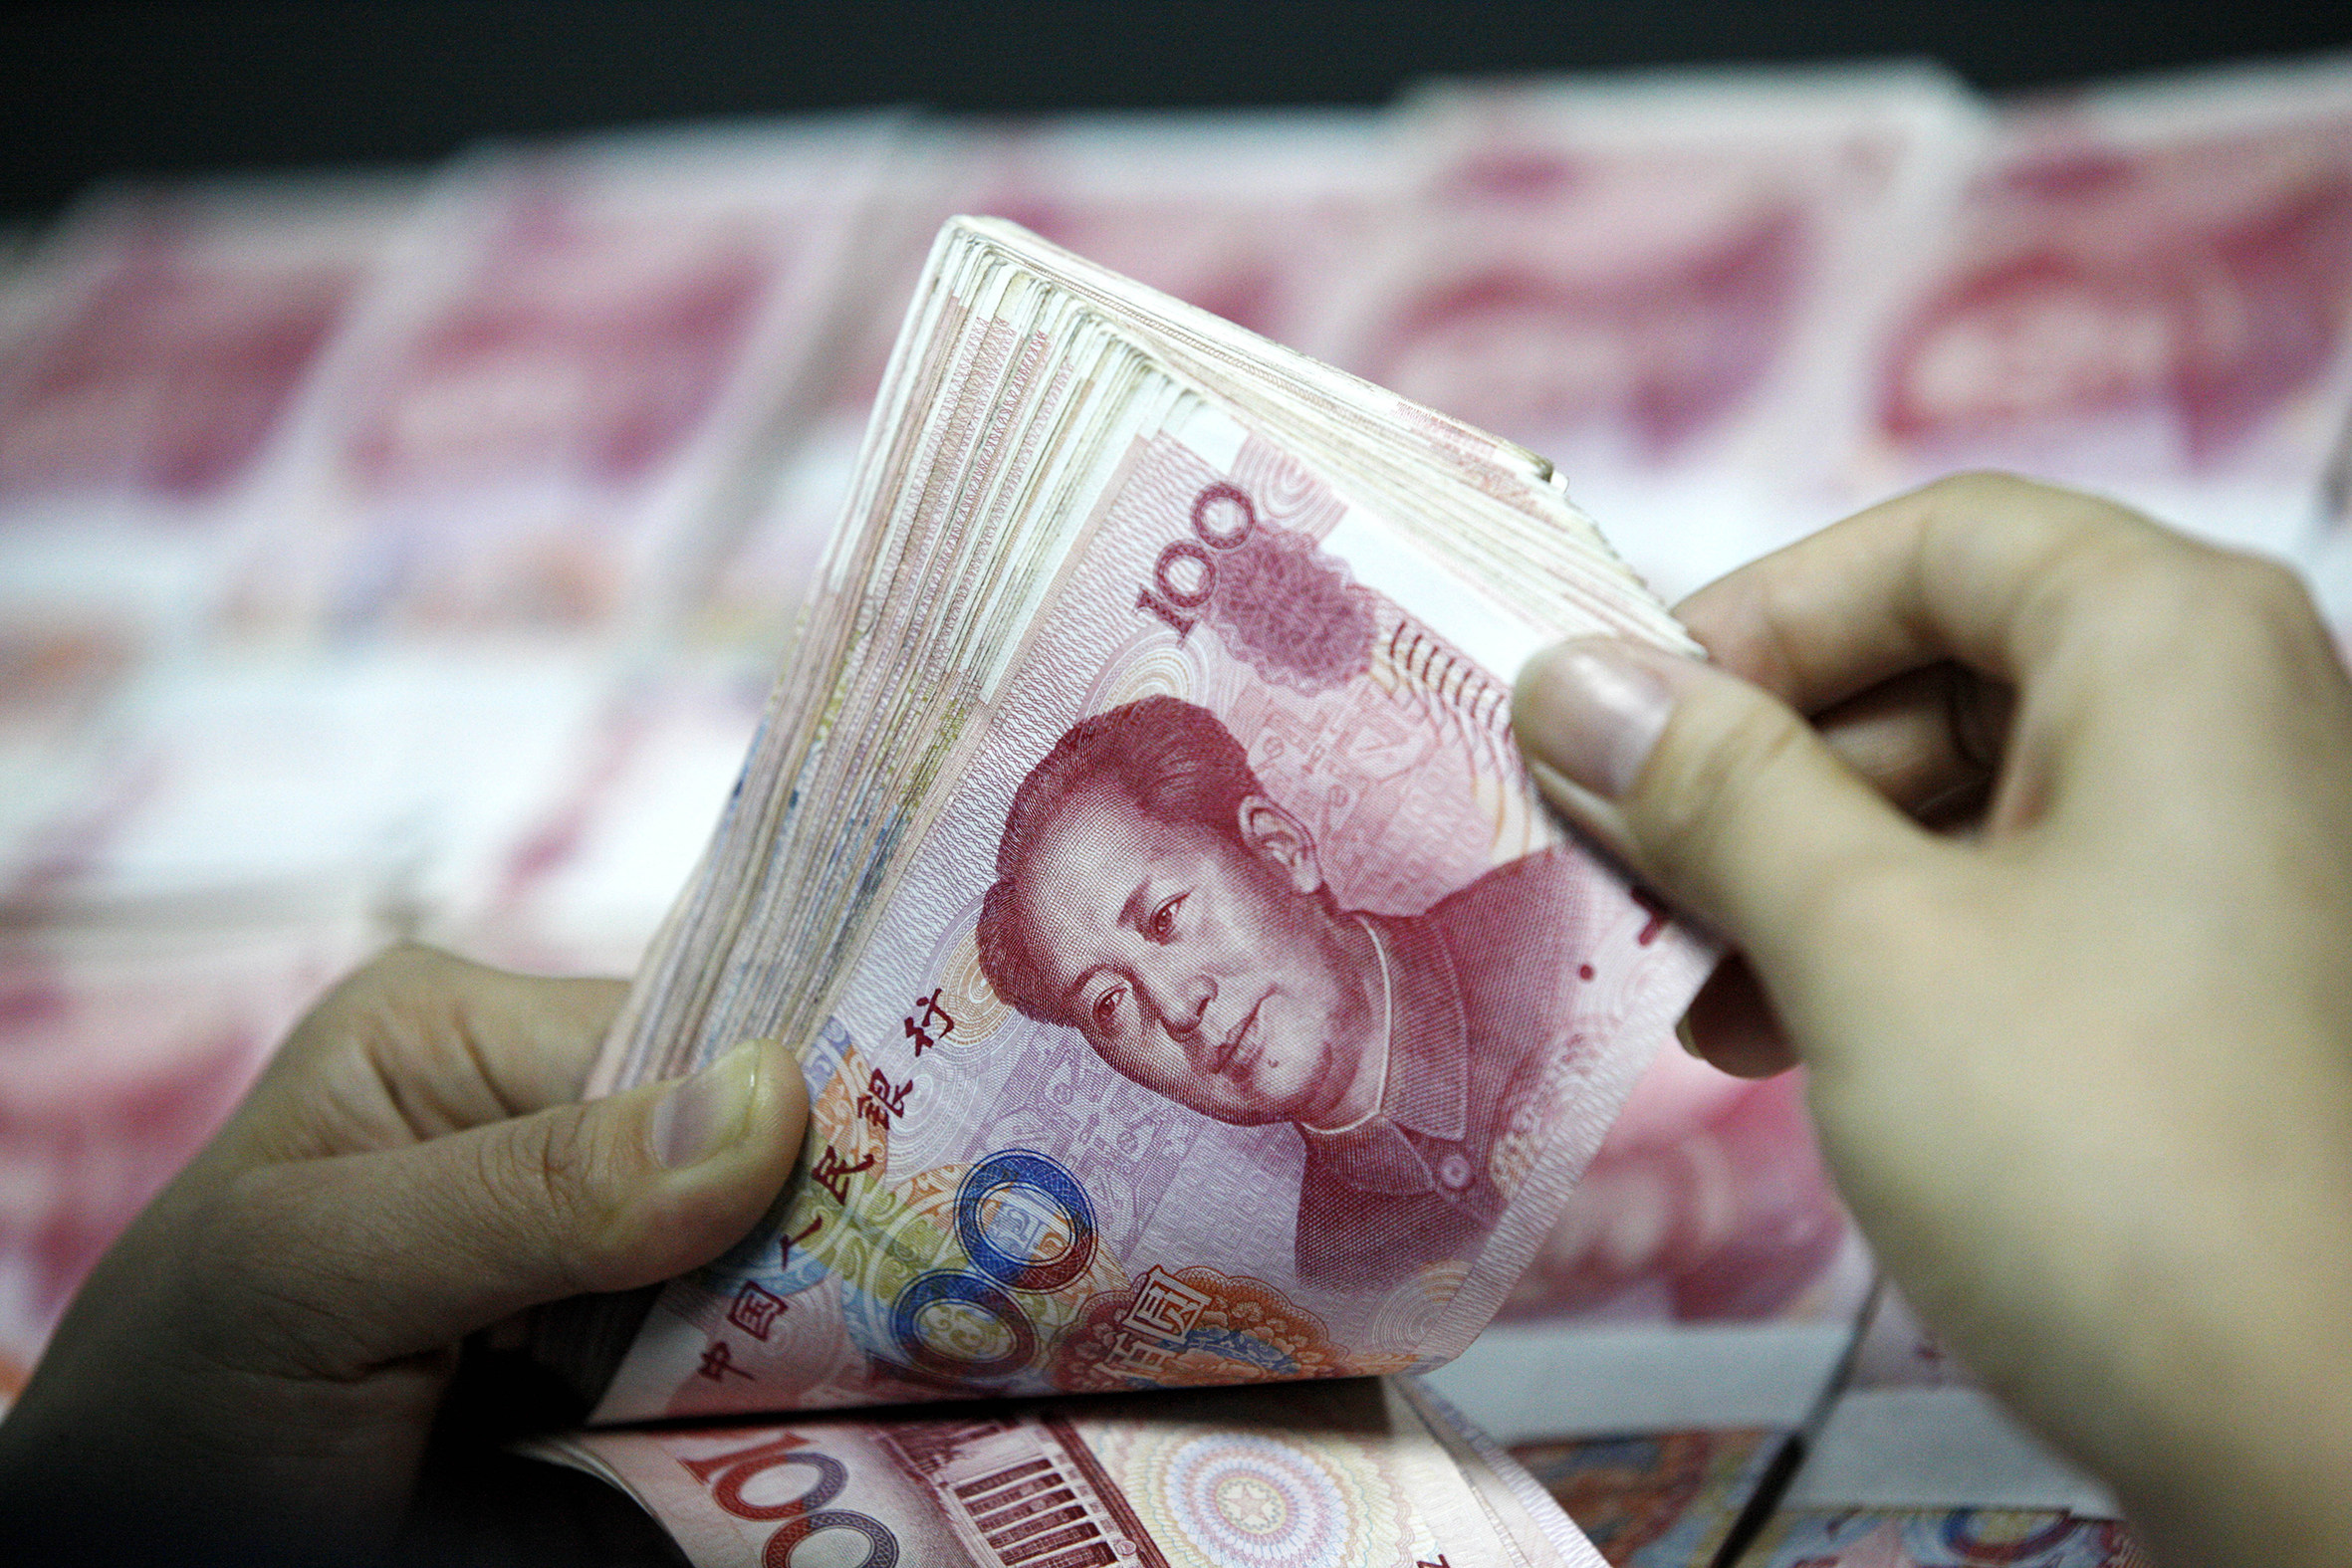 China’s small banks have become a target in a national anti-corruption campaign. Photo: Shutterstock